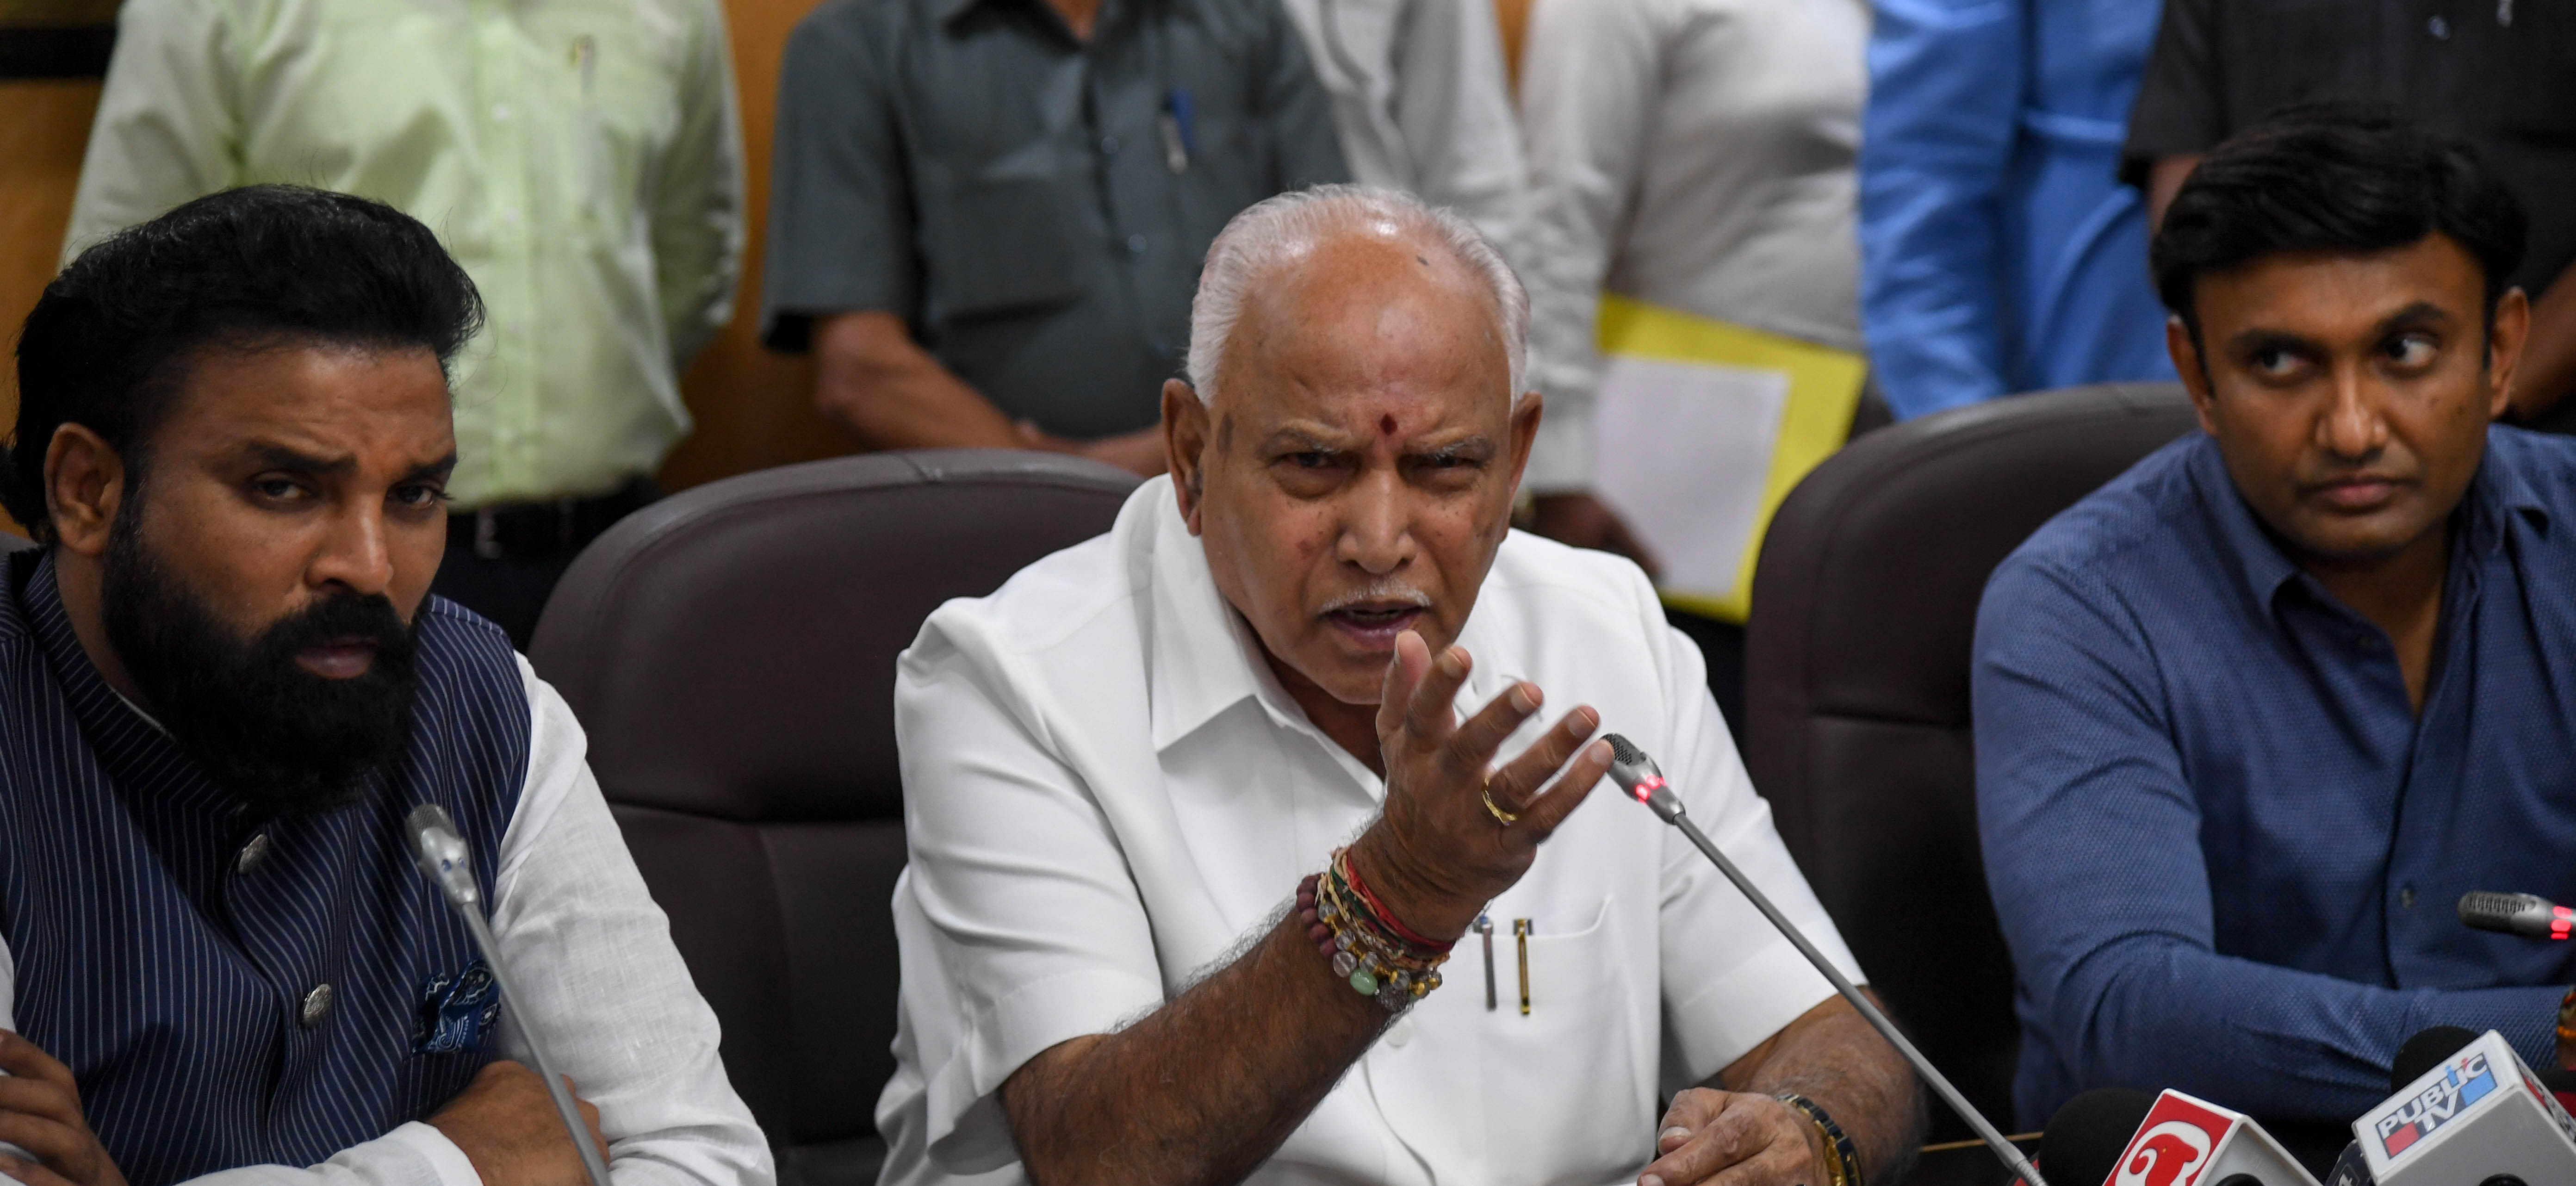 Chief Minister B S Yeddurappa addressing the press conference on coronary virus infection cases in Bengaluru. (DH Photo)